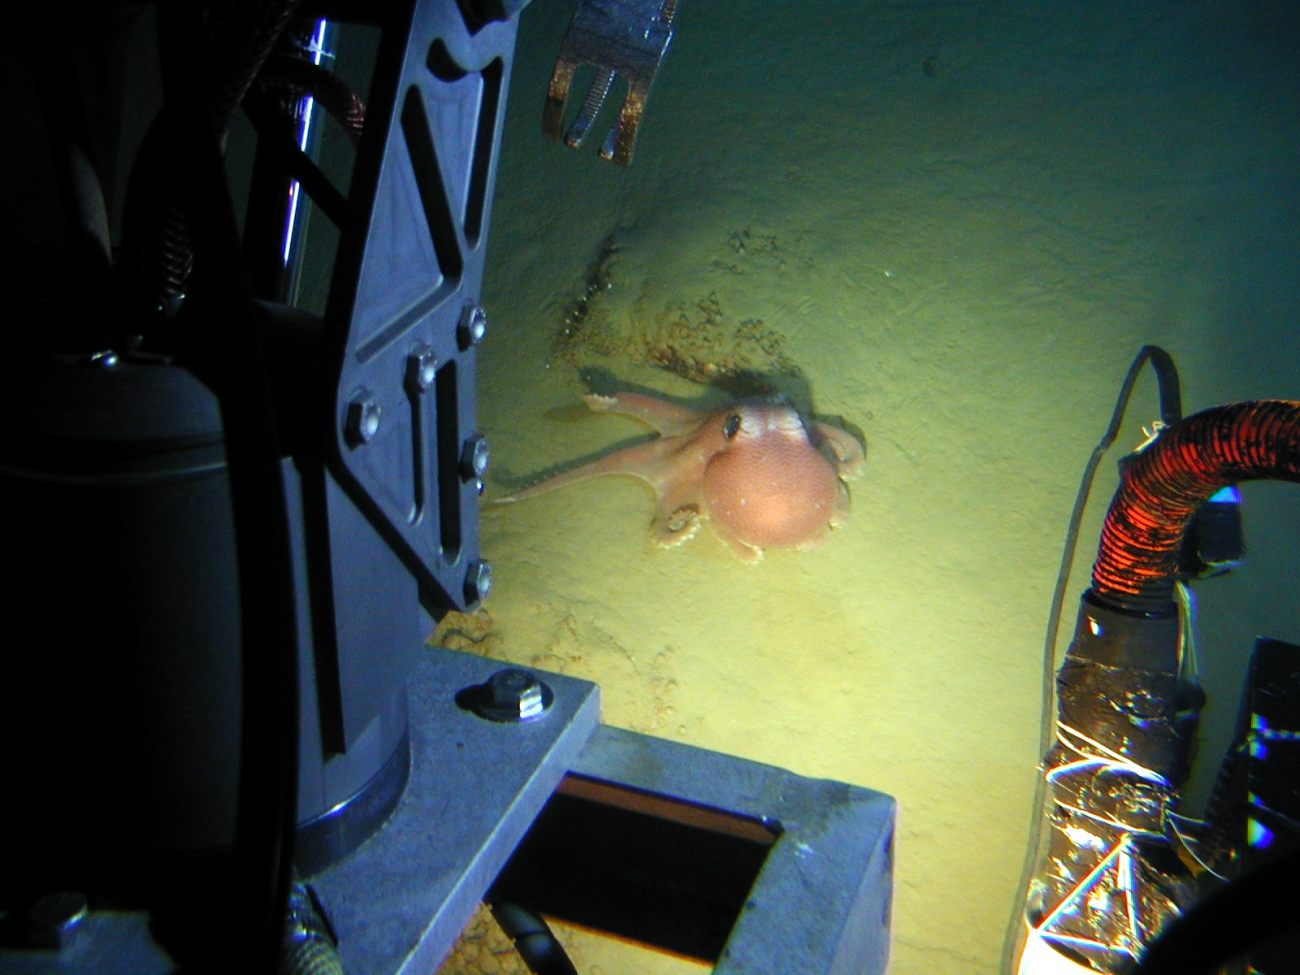 The Pisces IV submersible encounters a brightly colored octopus near ahydrothermal vent area at Monowai caldera at about 1050 meters